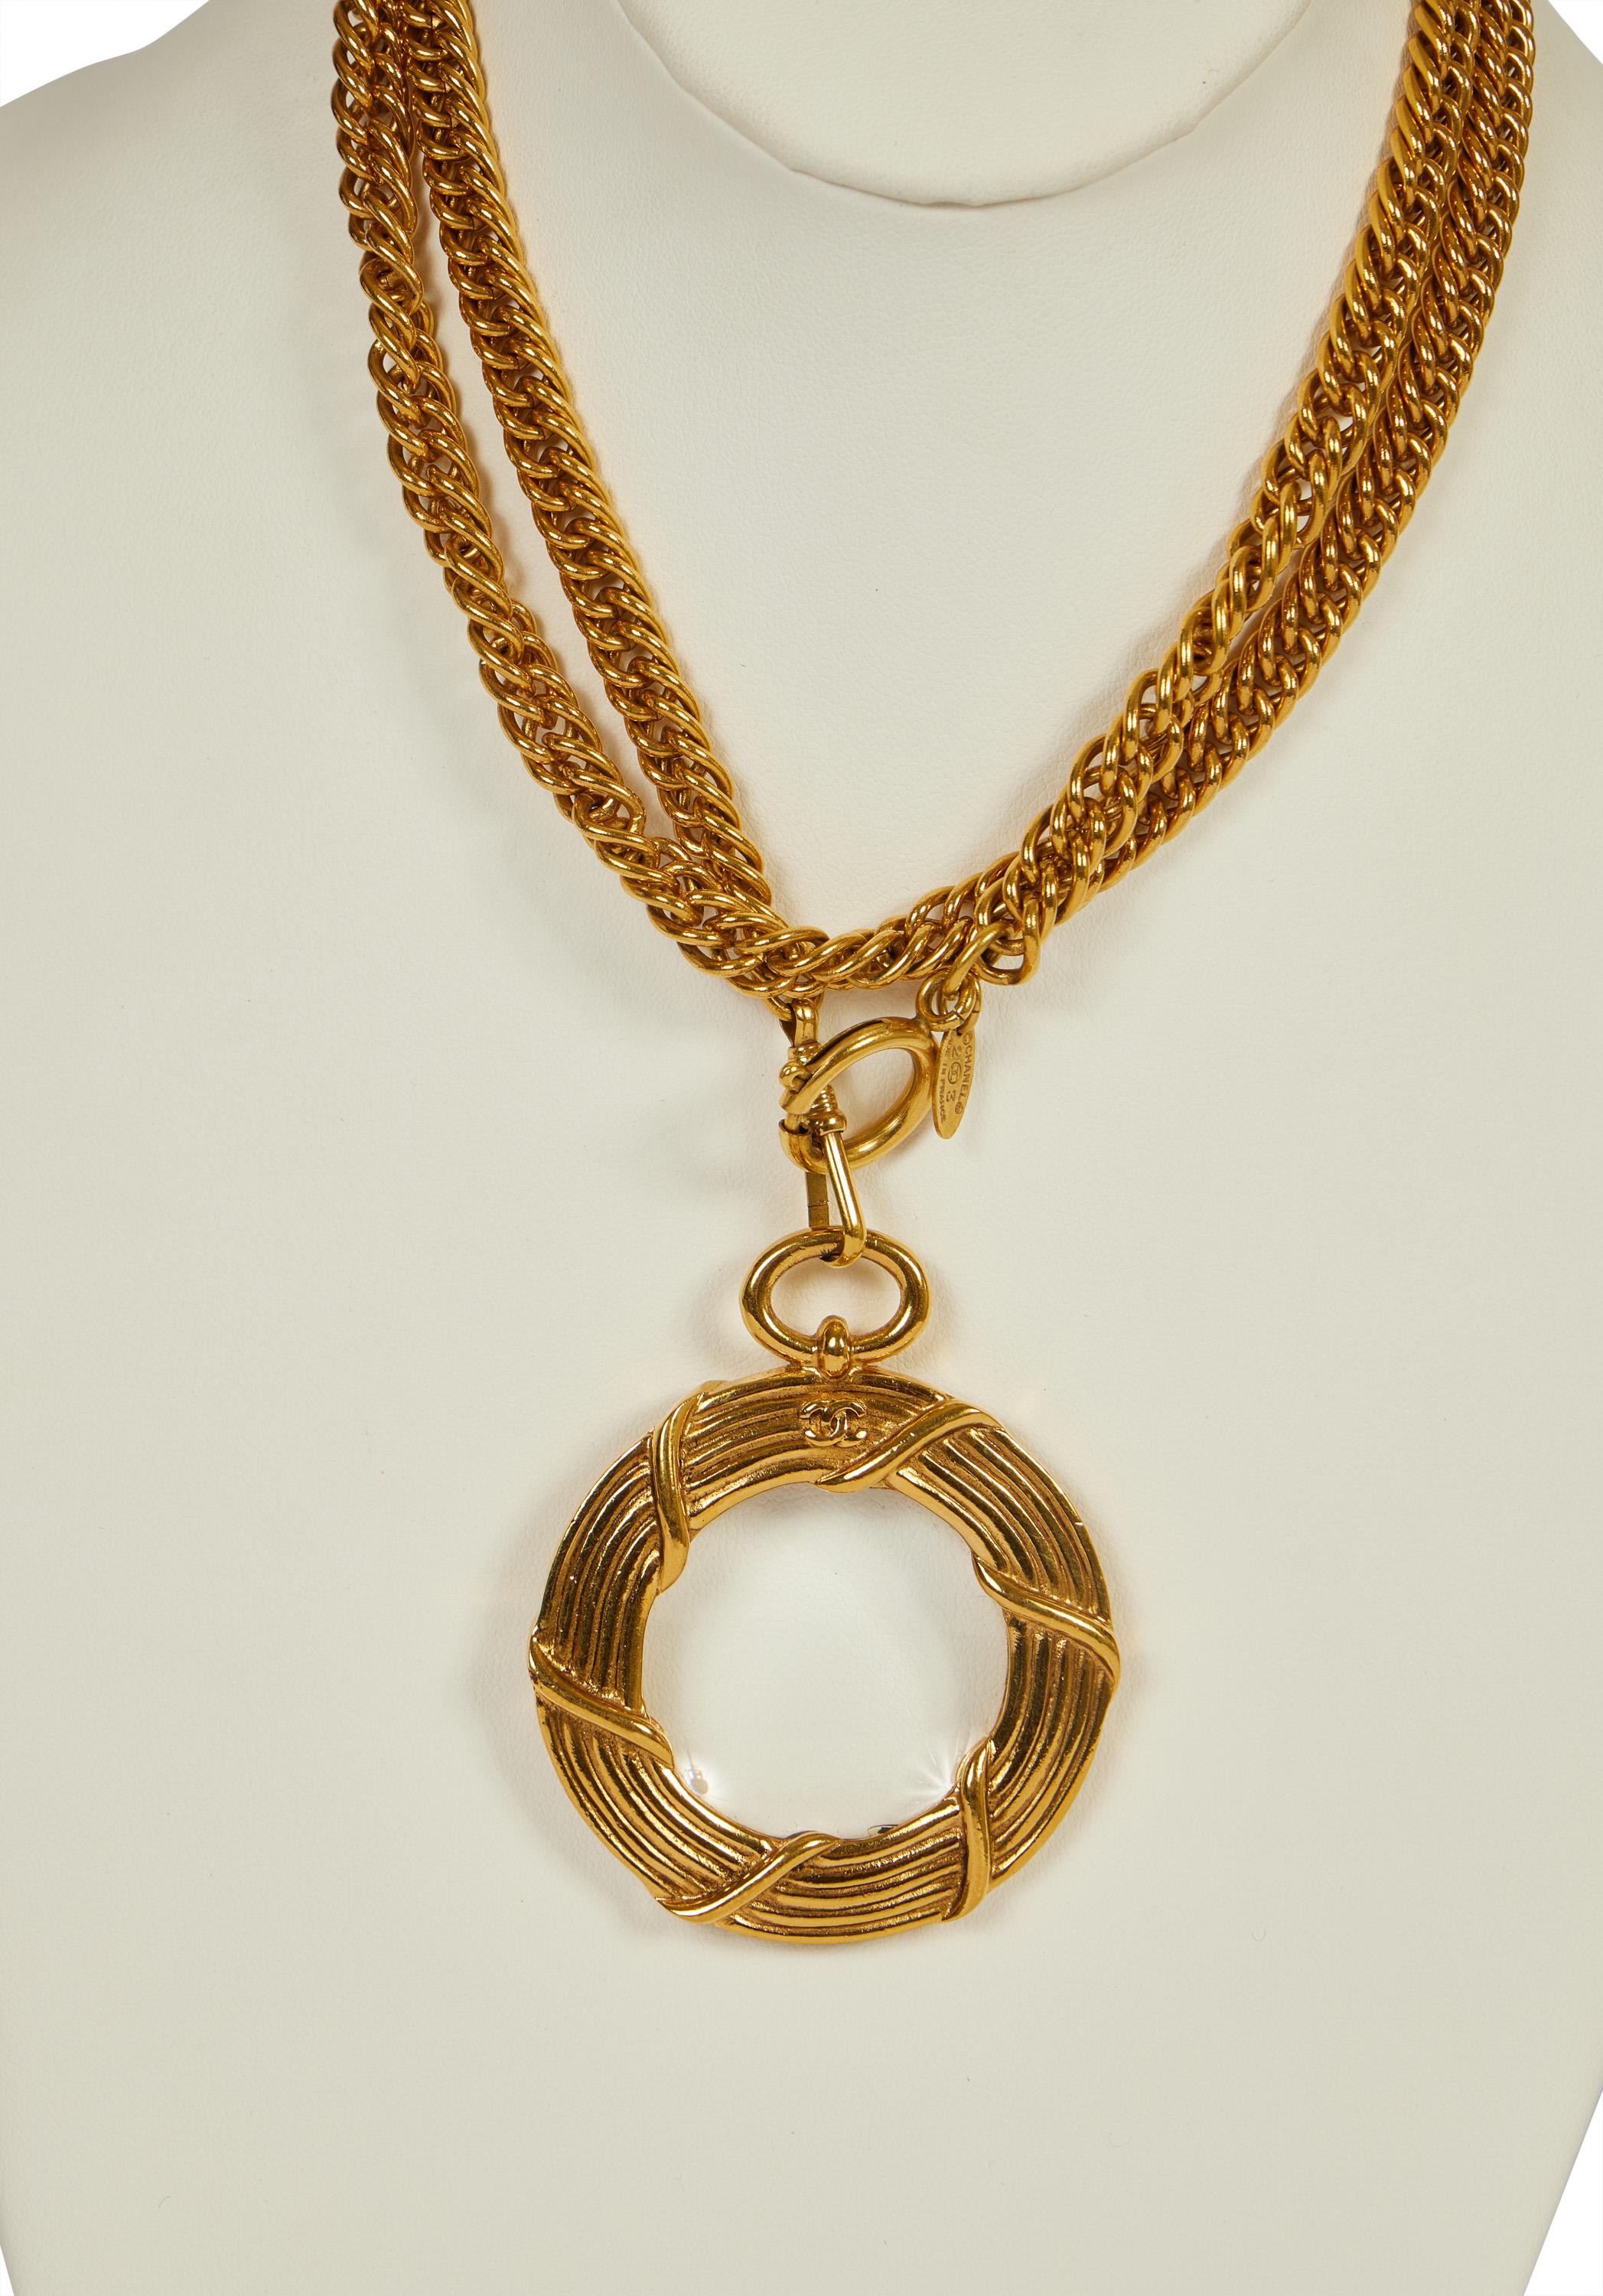 Women's 1980s Chanel Magnifier Gold Chain Necklace